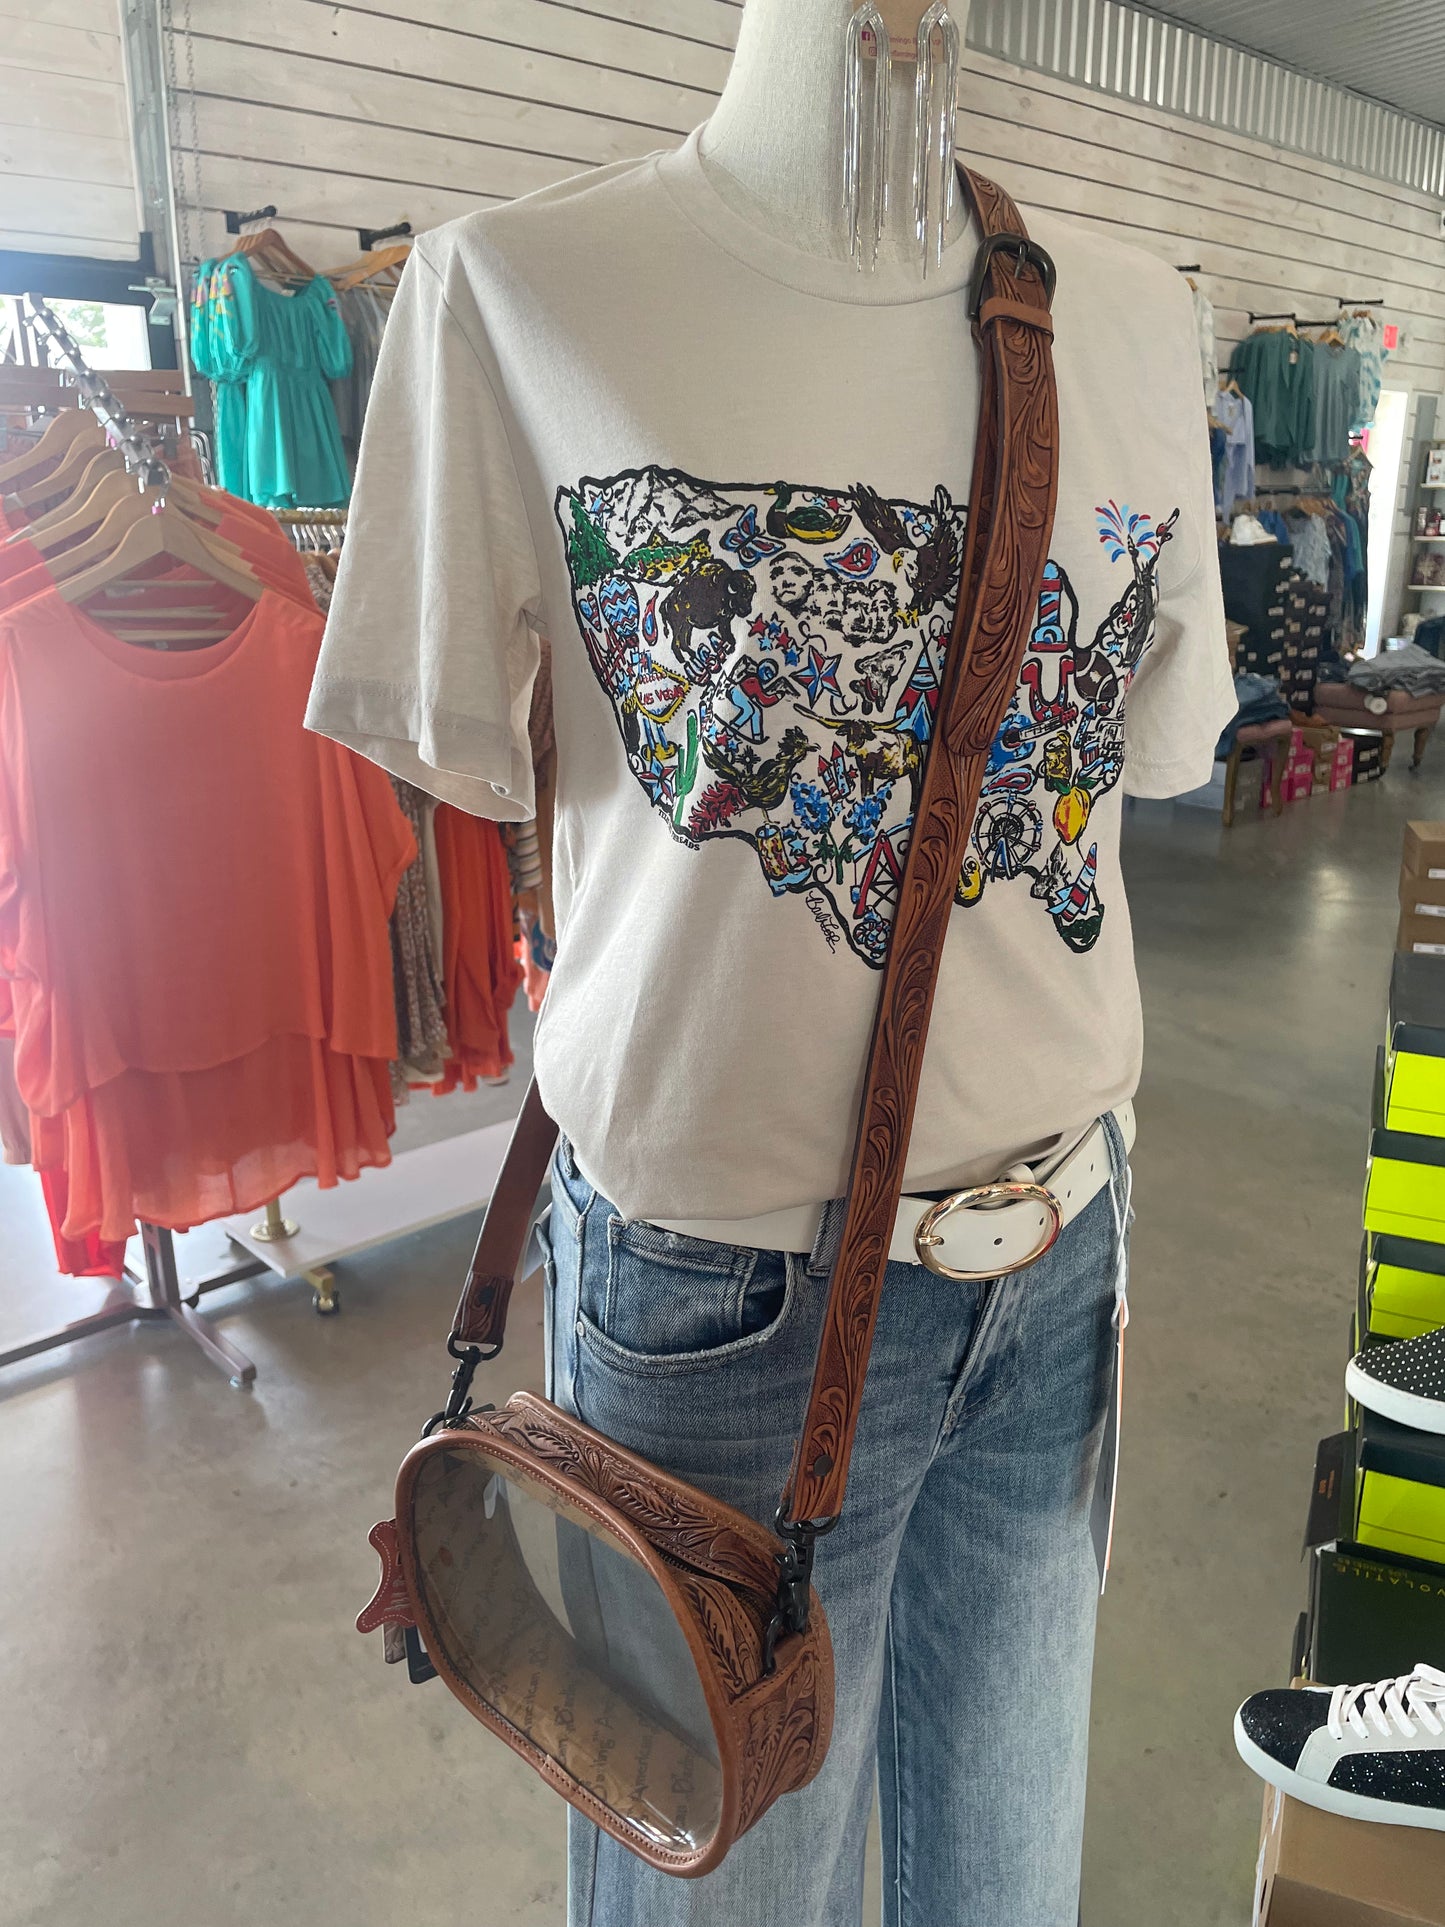 The Cowboy Town: Clear Stadium Bags – Ace's Arrow Western Store